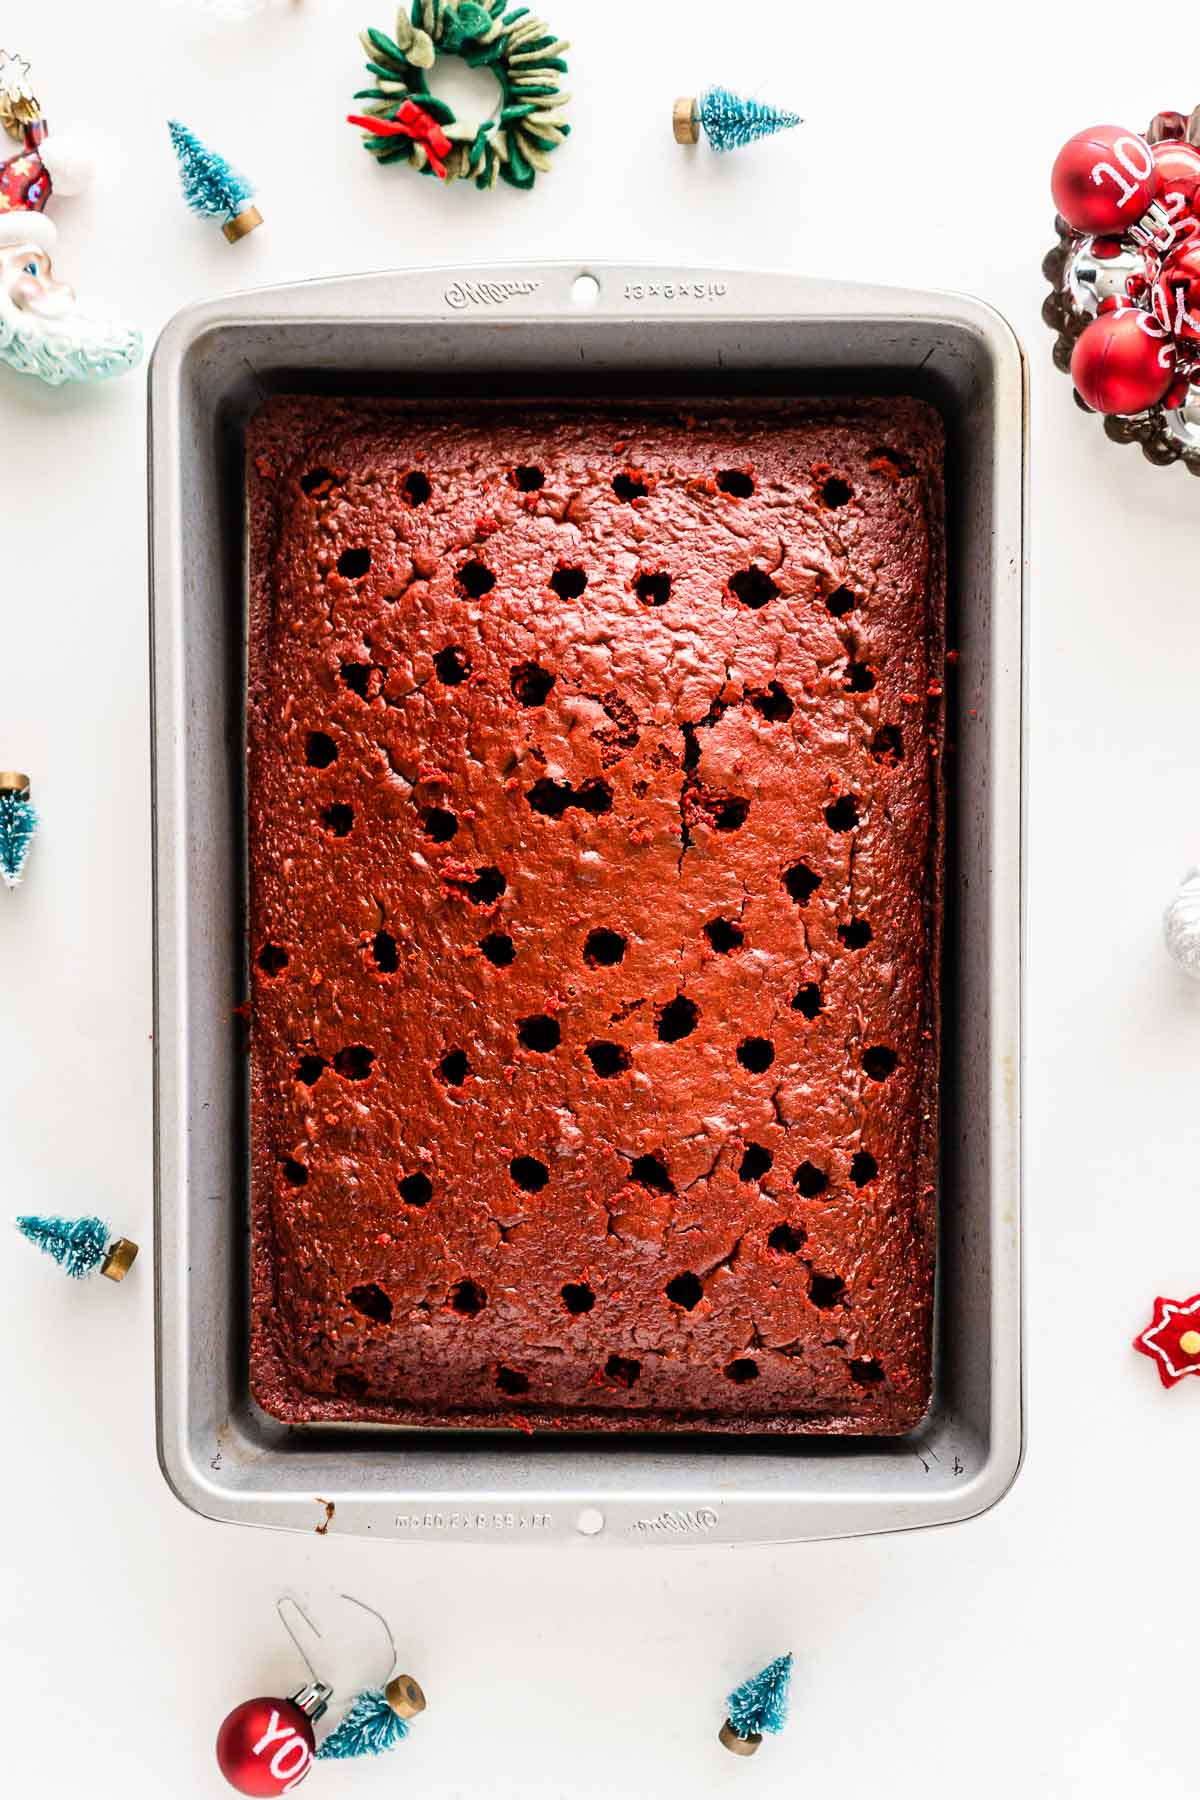 baking pan with red velvet cake with holed poked in it